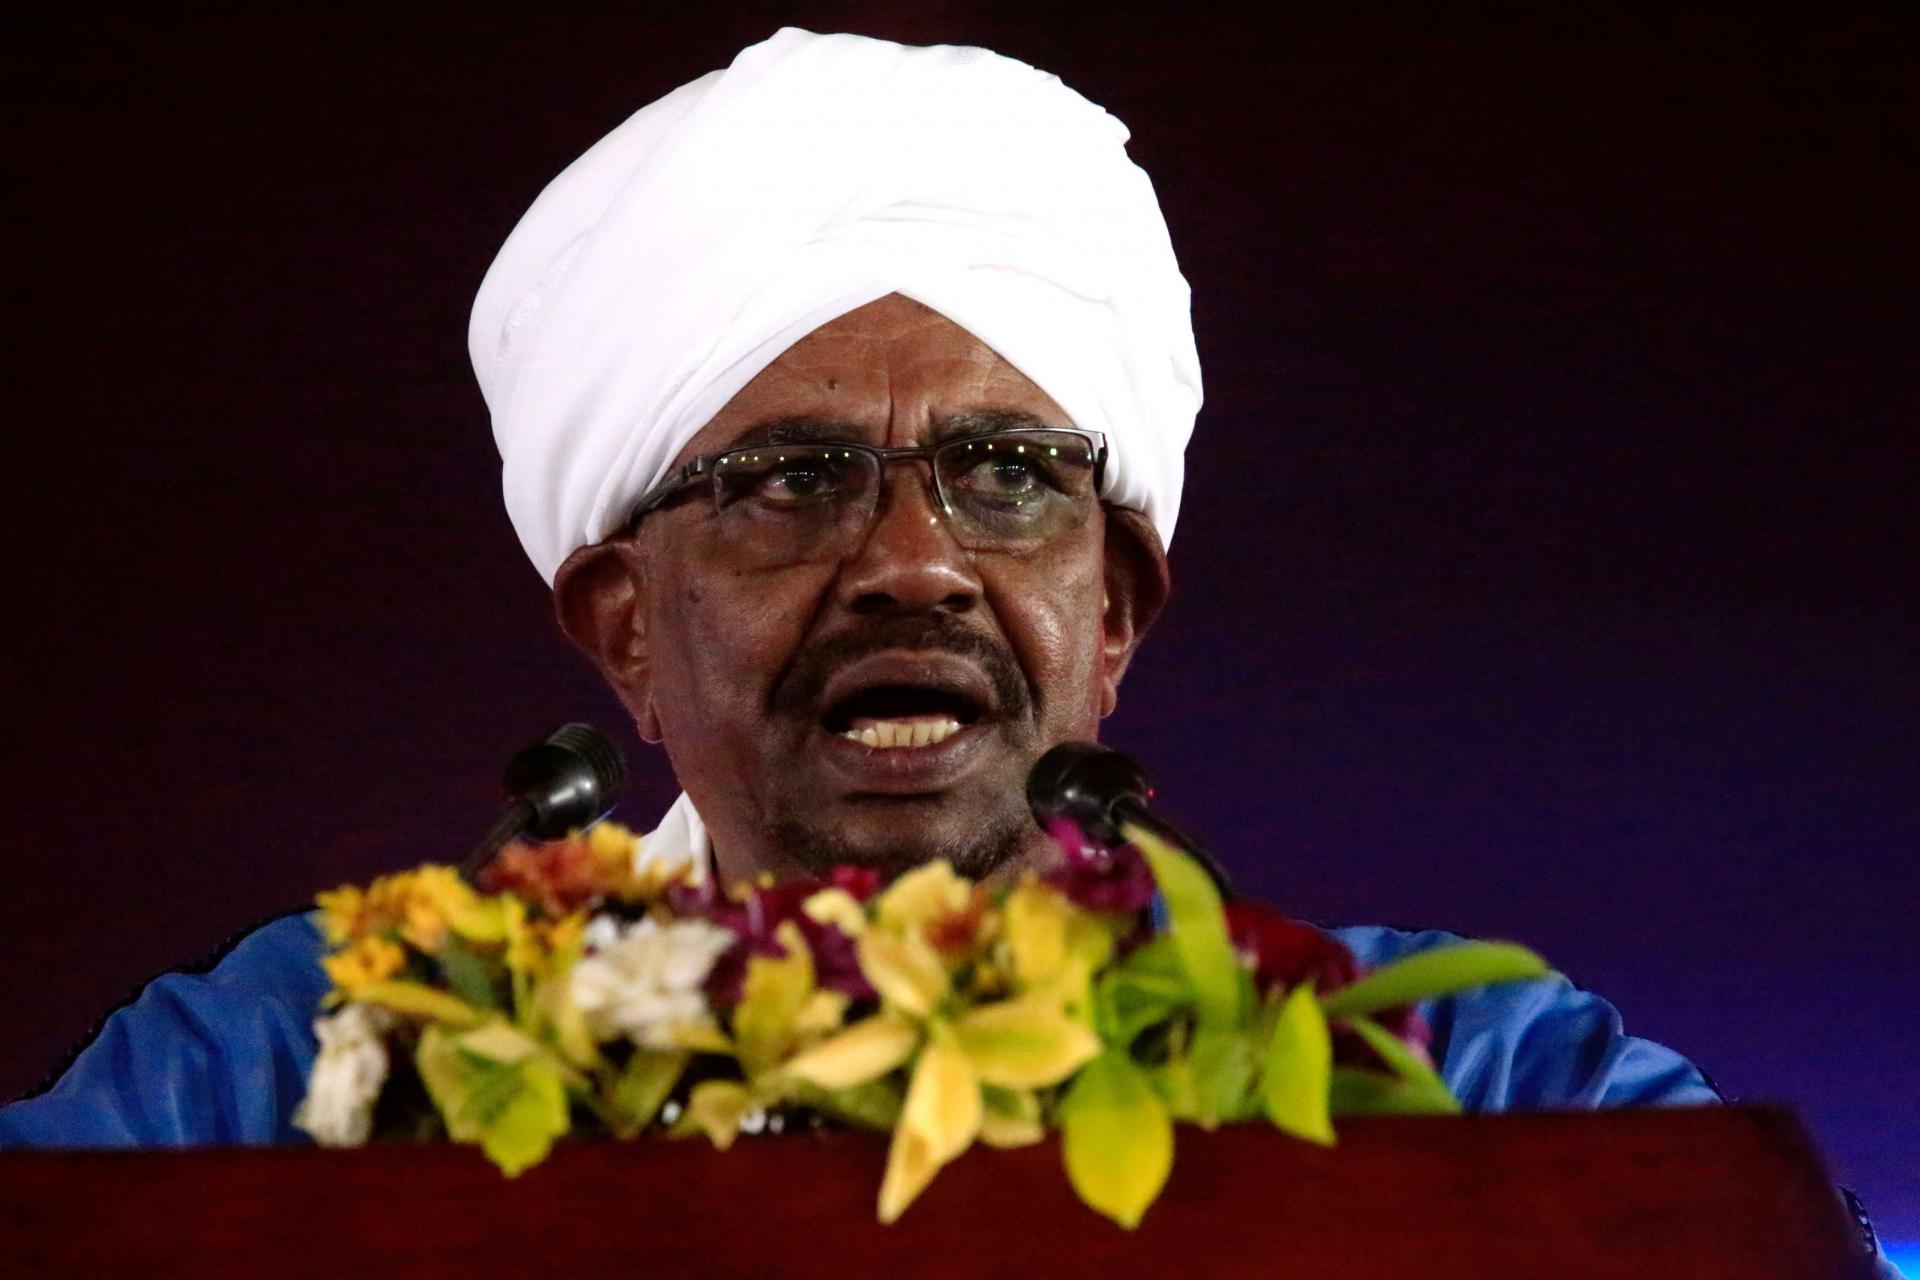 Sudan has been rocked by protests since December 19 after a government decision to triple the price of bread.